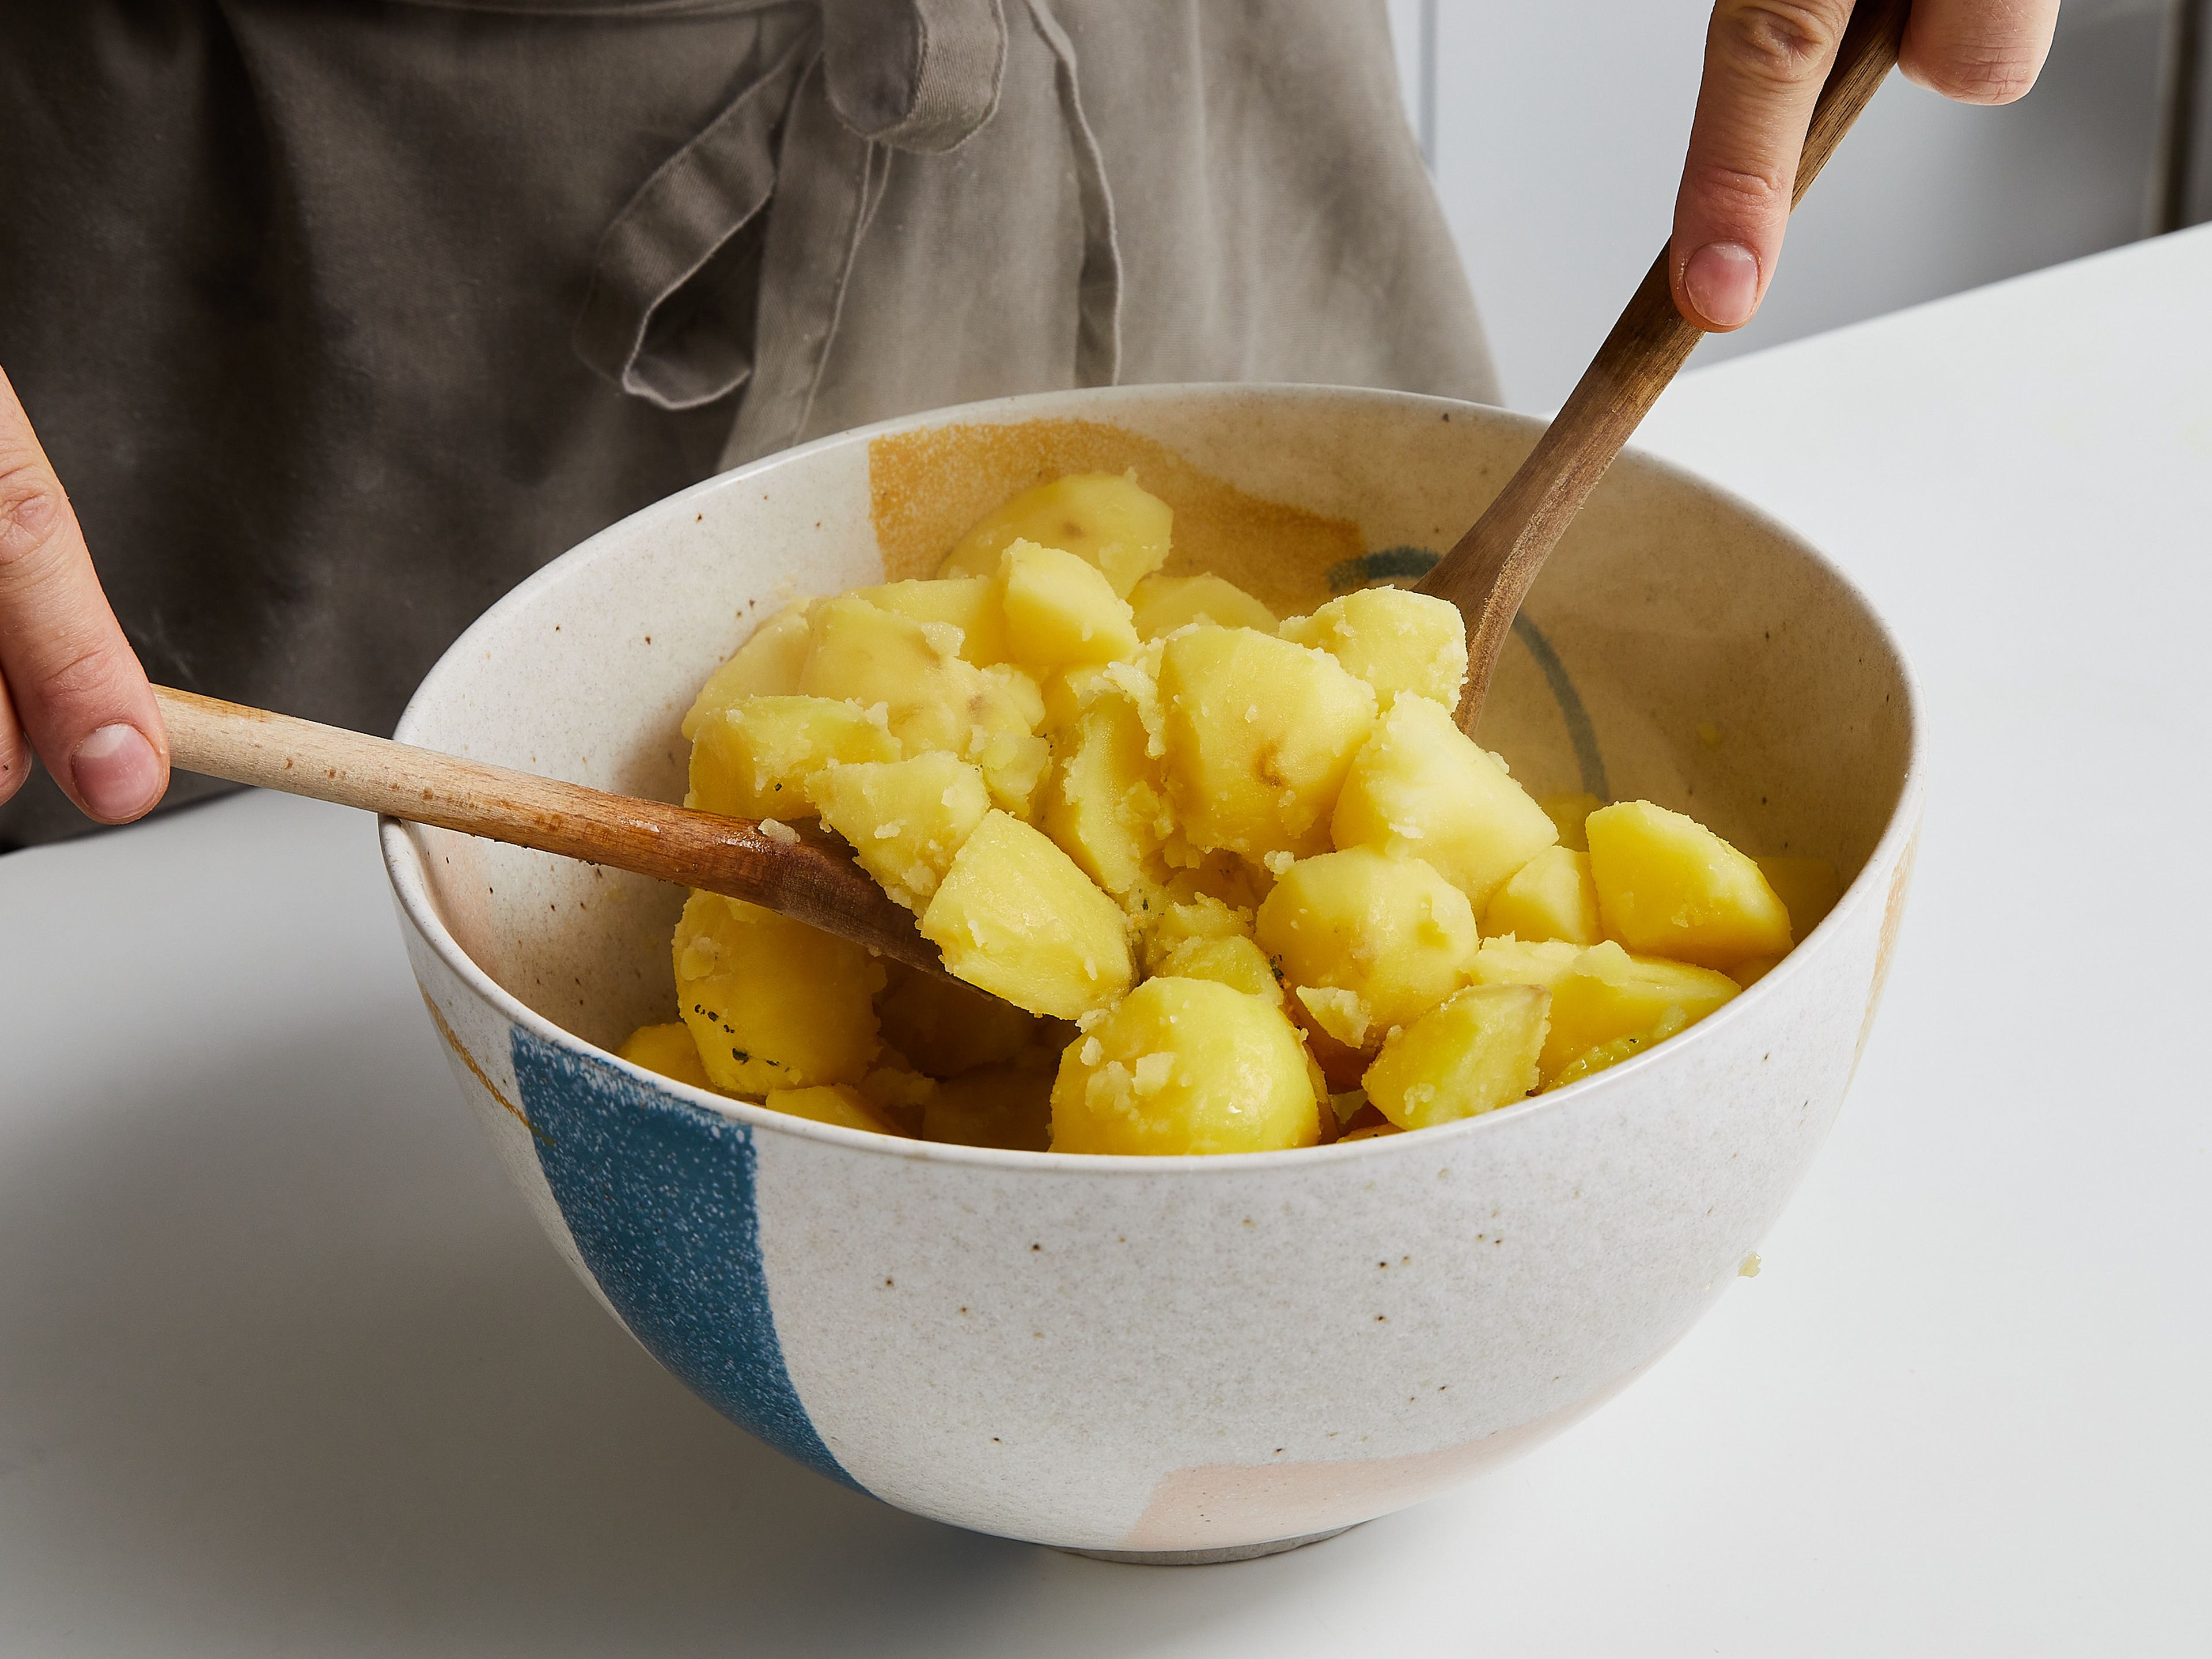 When potatoes are cooked, carefully drain them and put them back in the pot for about 30 seconds, to allow excess moisture to evaporate. Add potato pieces to the bowl with the oil, season with a little more salt and pepper, and toss until a thin layer of the mushy surface has formed.